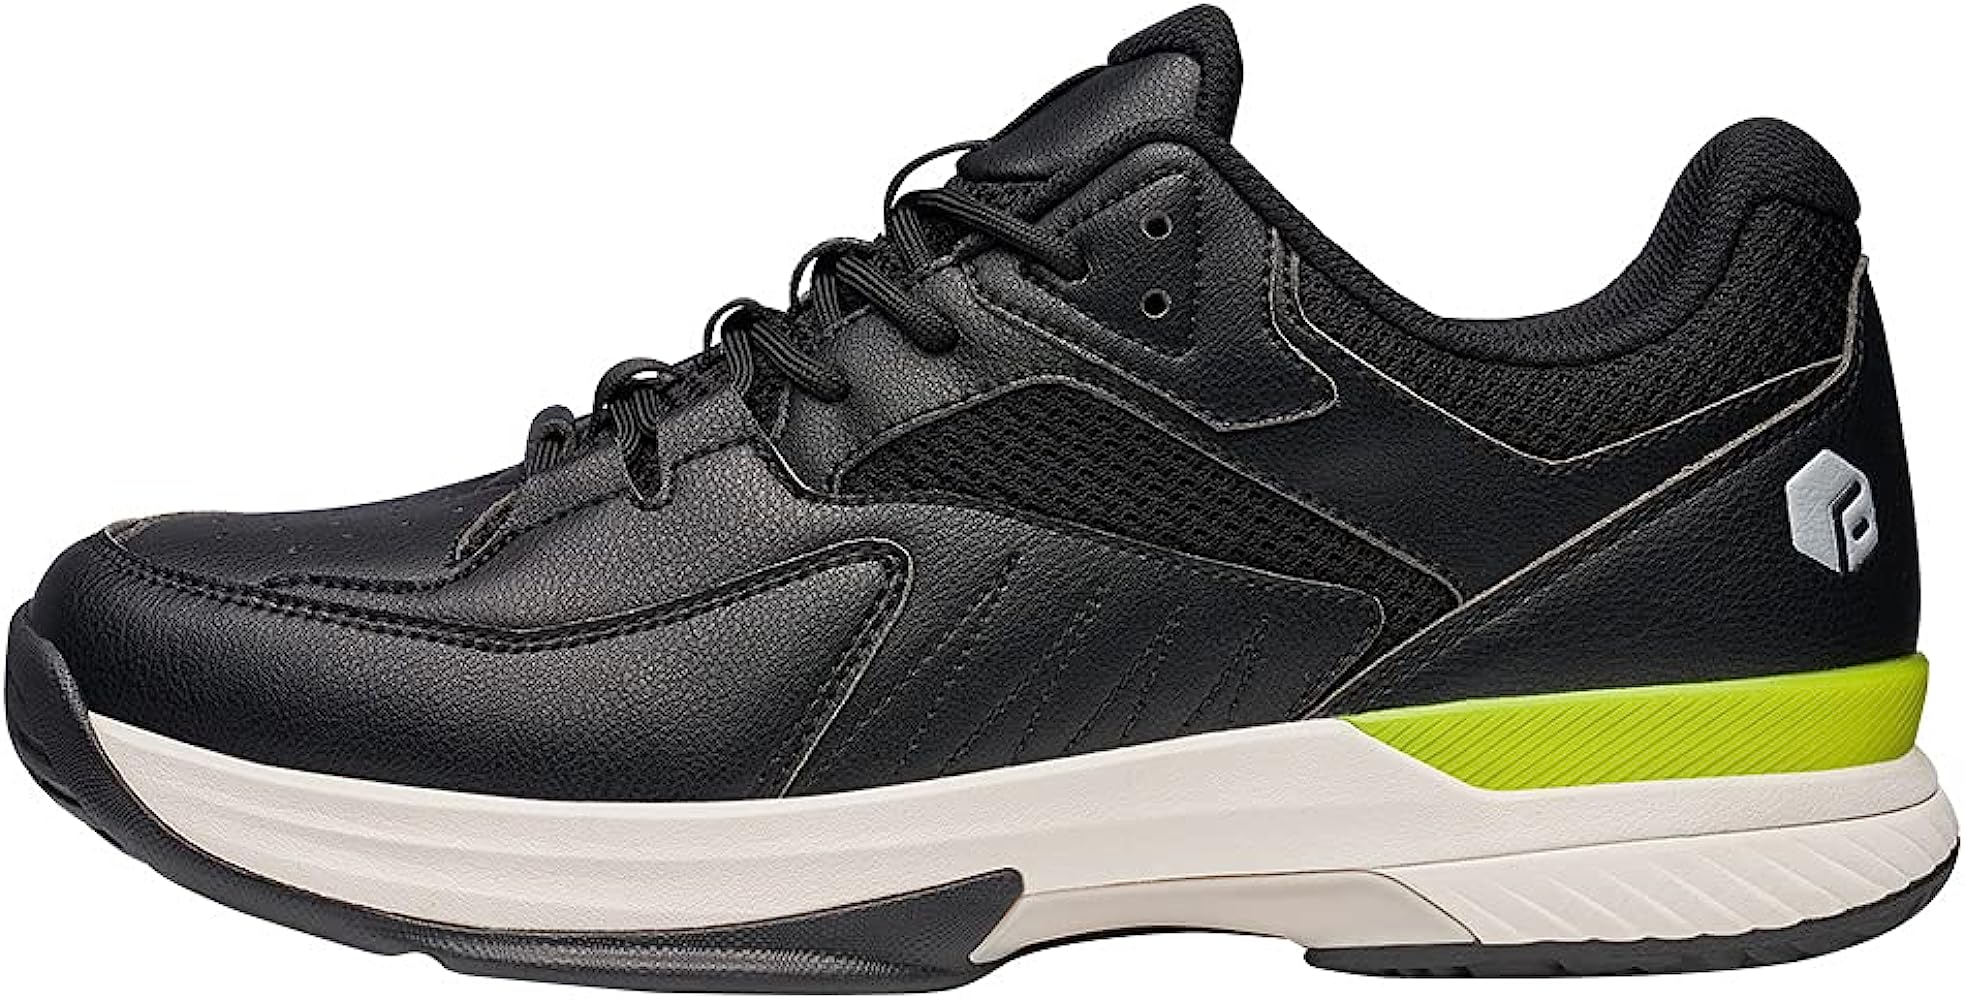 The Best Pickleball Shoes - FitVille